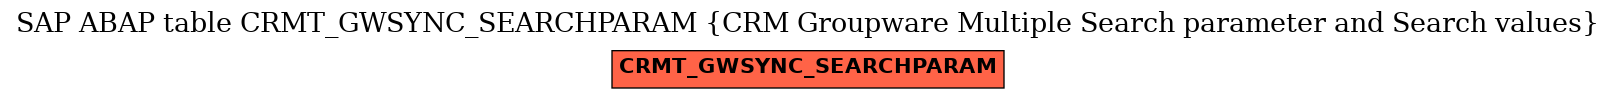 E-R Diagram for table CRMT_GWSYNC_SEARCHPARAM (CRM Groupware Multiple Search parameter and Search values)